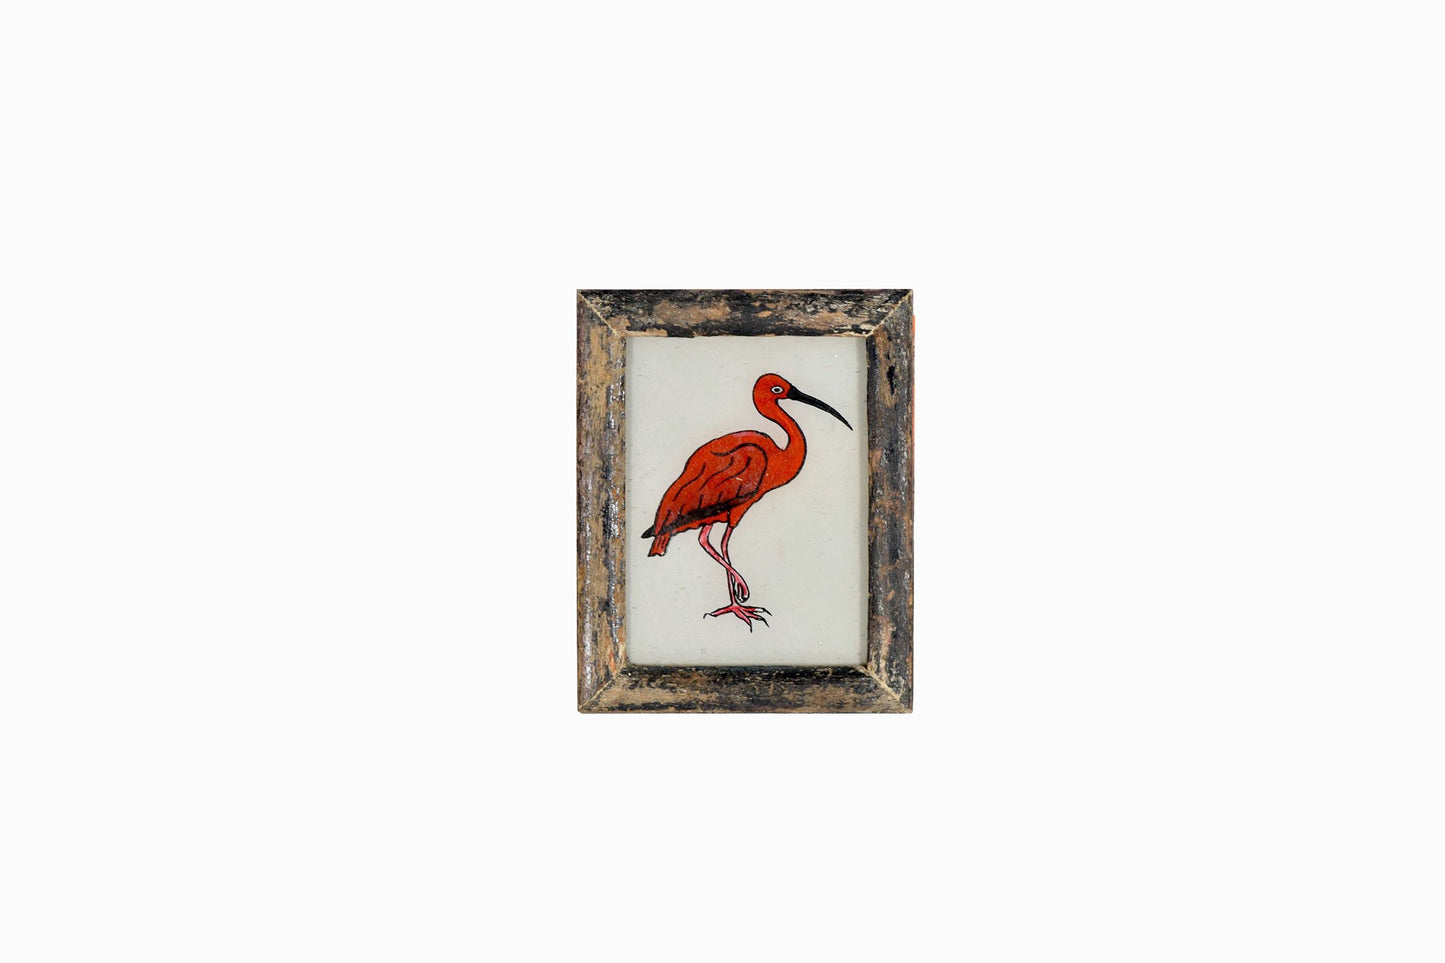 Indian glass painting of a flamingo (very small) rounded wood frame